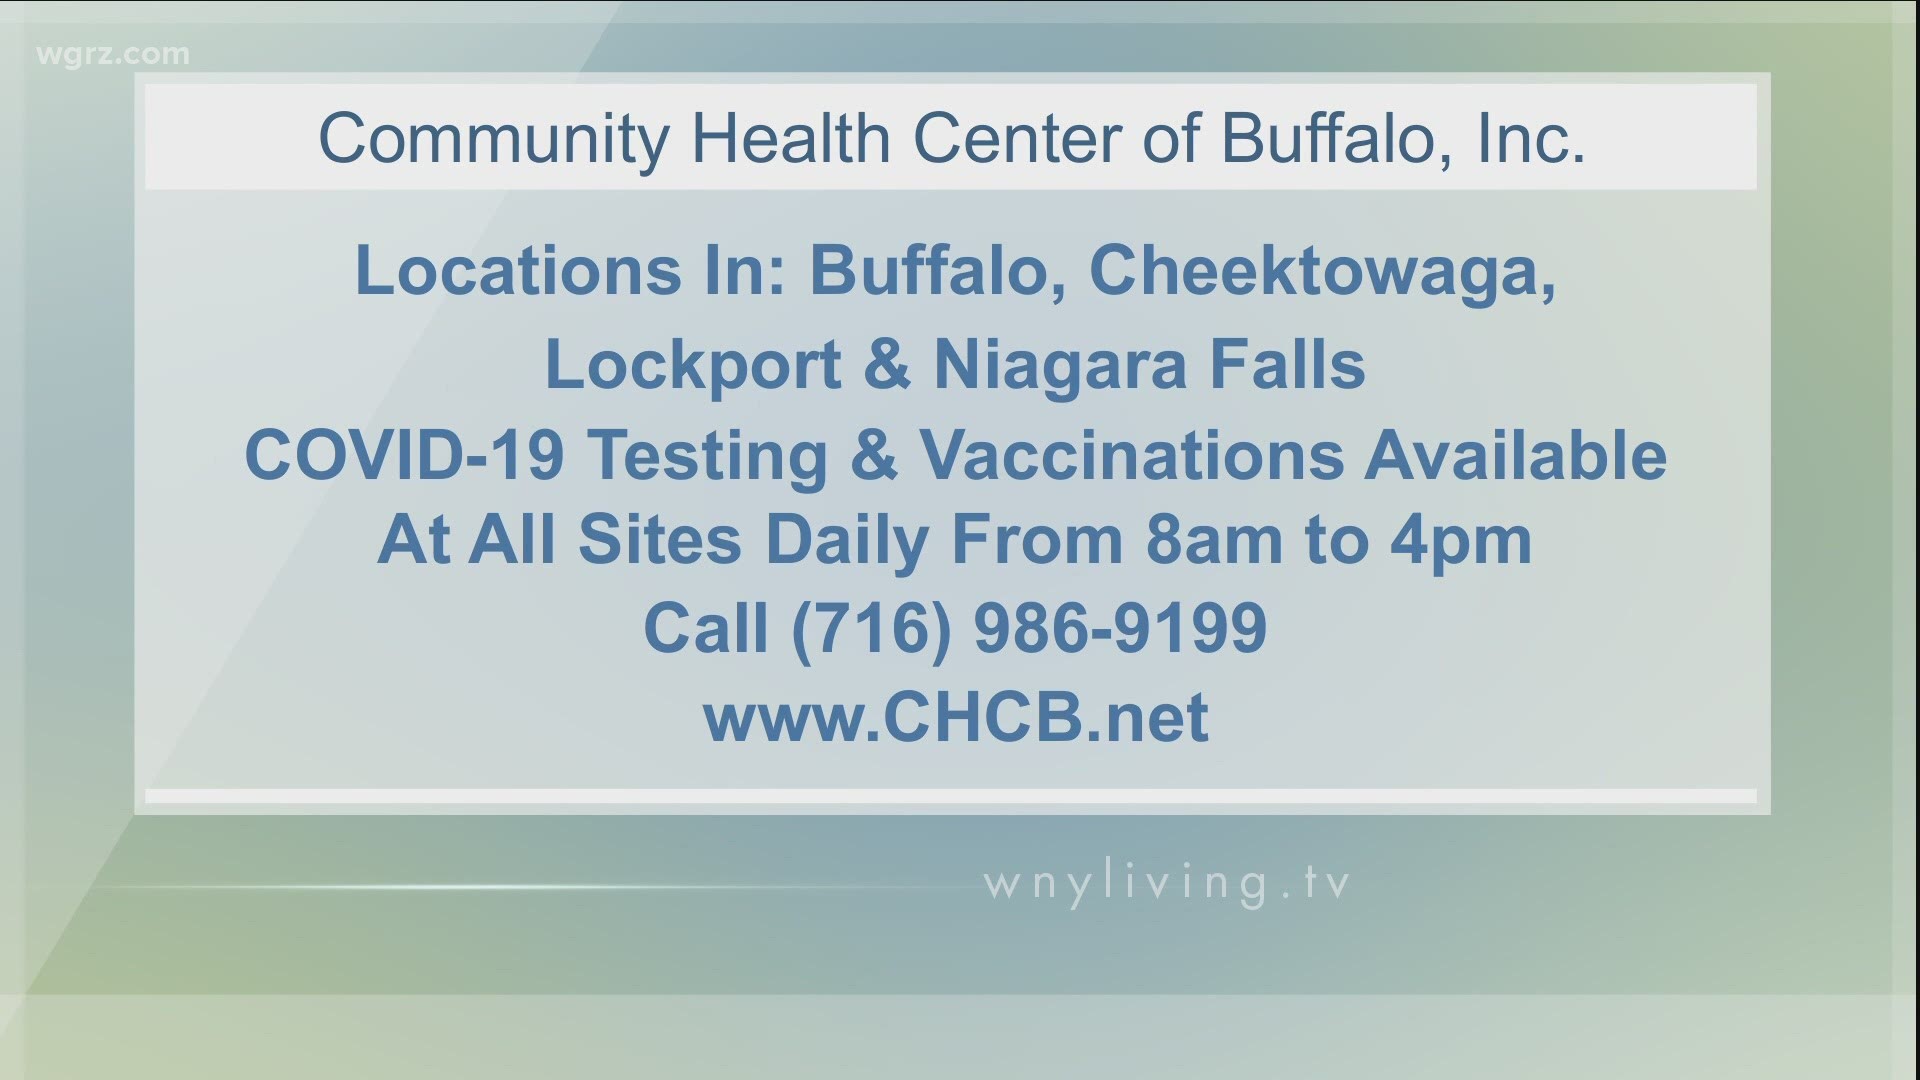 WNY Living - July 3 - Community Health Center of Buffalo, Inc. (THIS VIDEO IS SPONSORED BY COMMUNITY HEALTH CENTER OF BUFFALO, INC.)